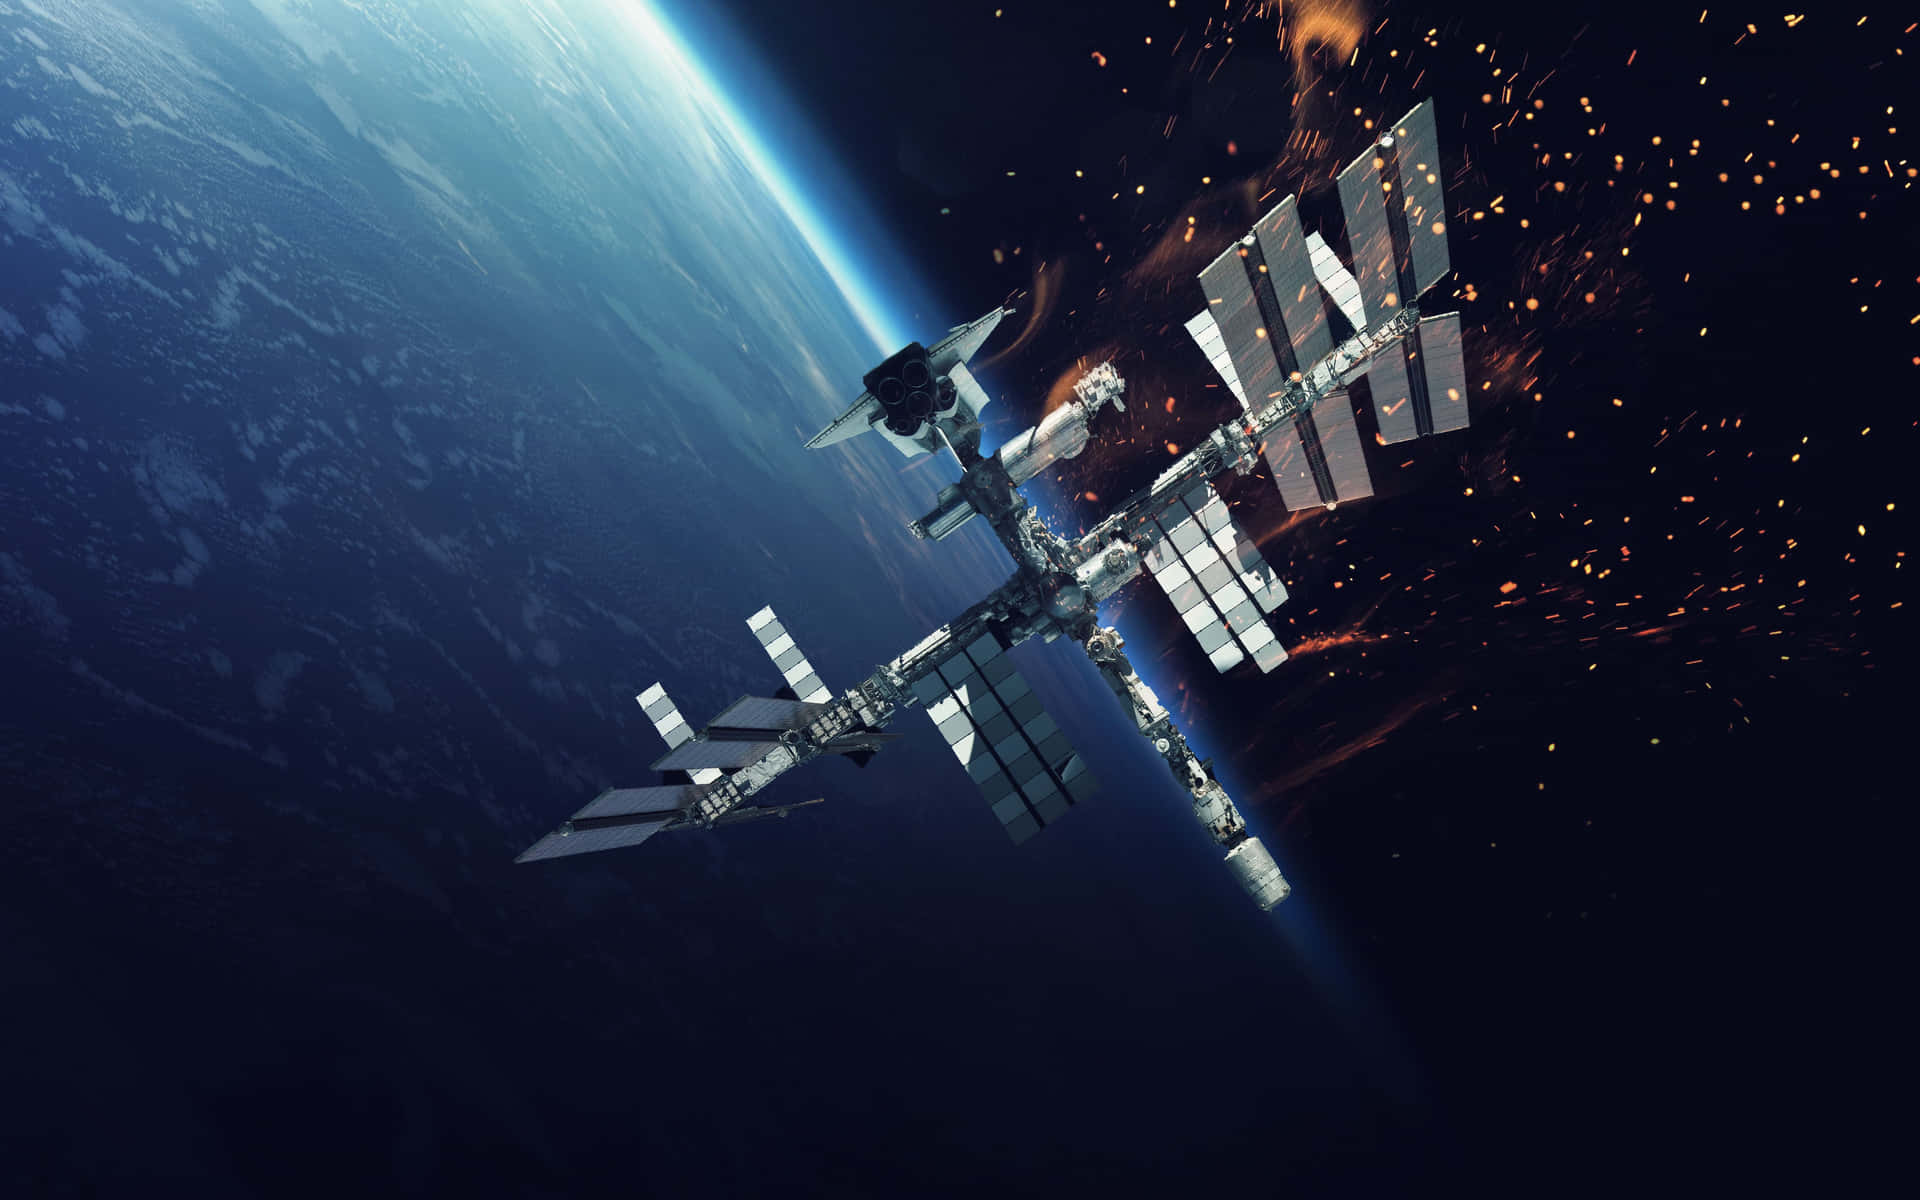 an image of the international space station